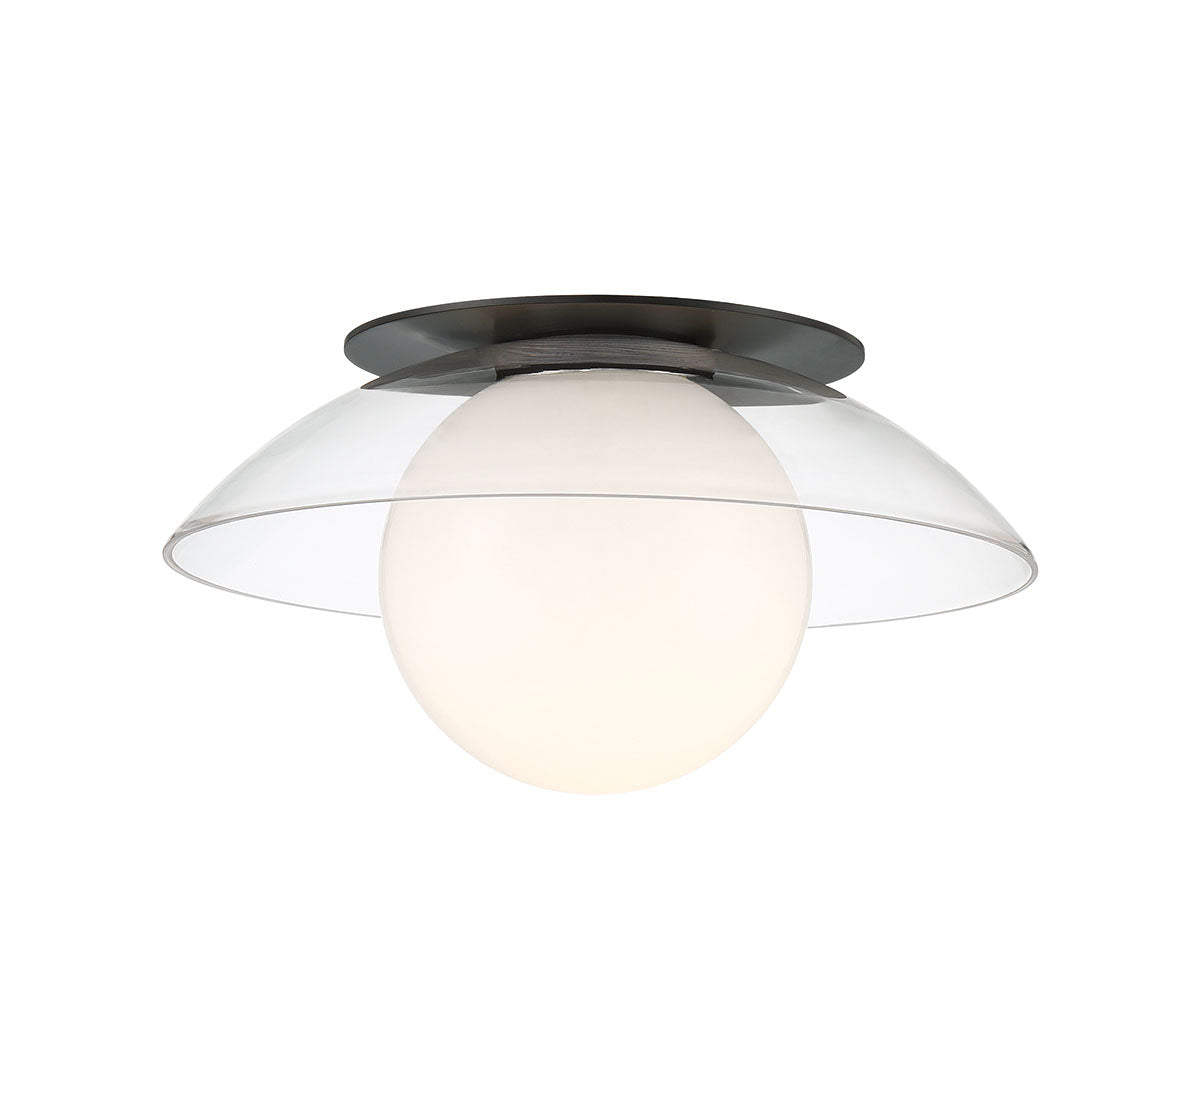 ANCONA 10125-05, Small 1 Light Ceiling/Wall Mount